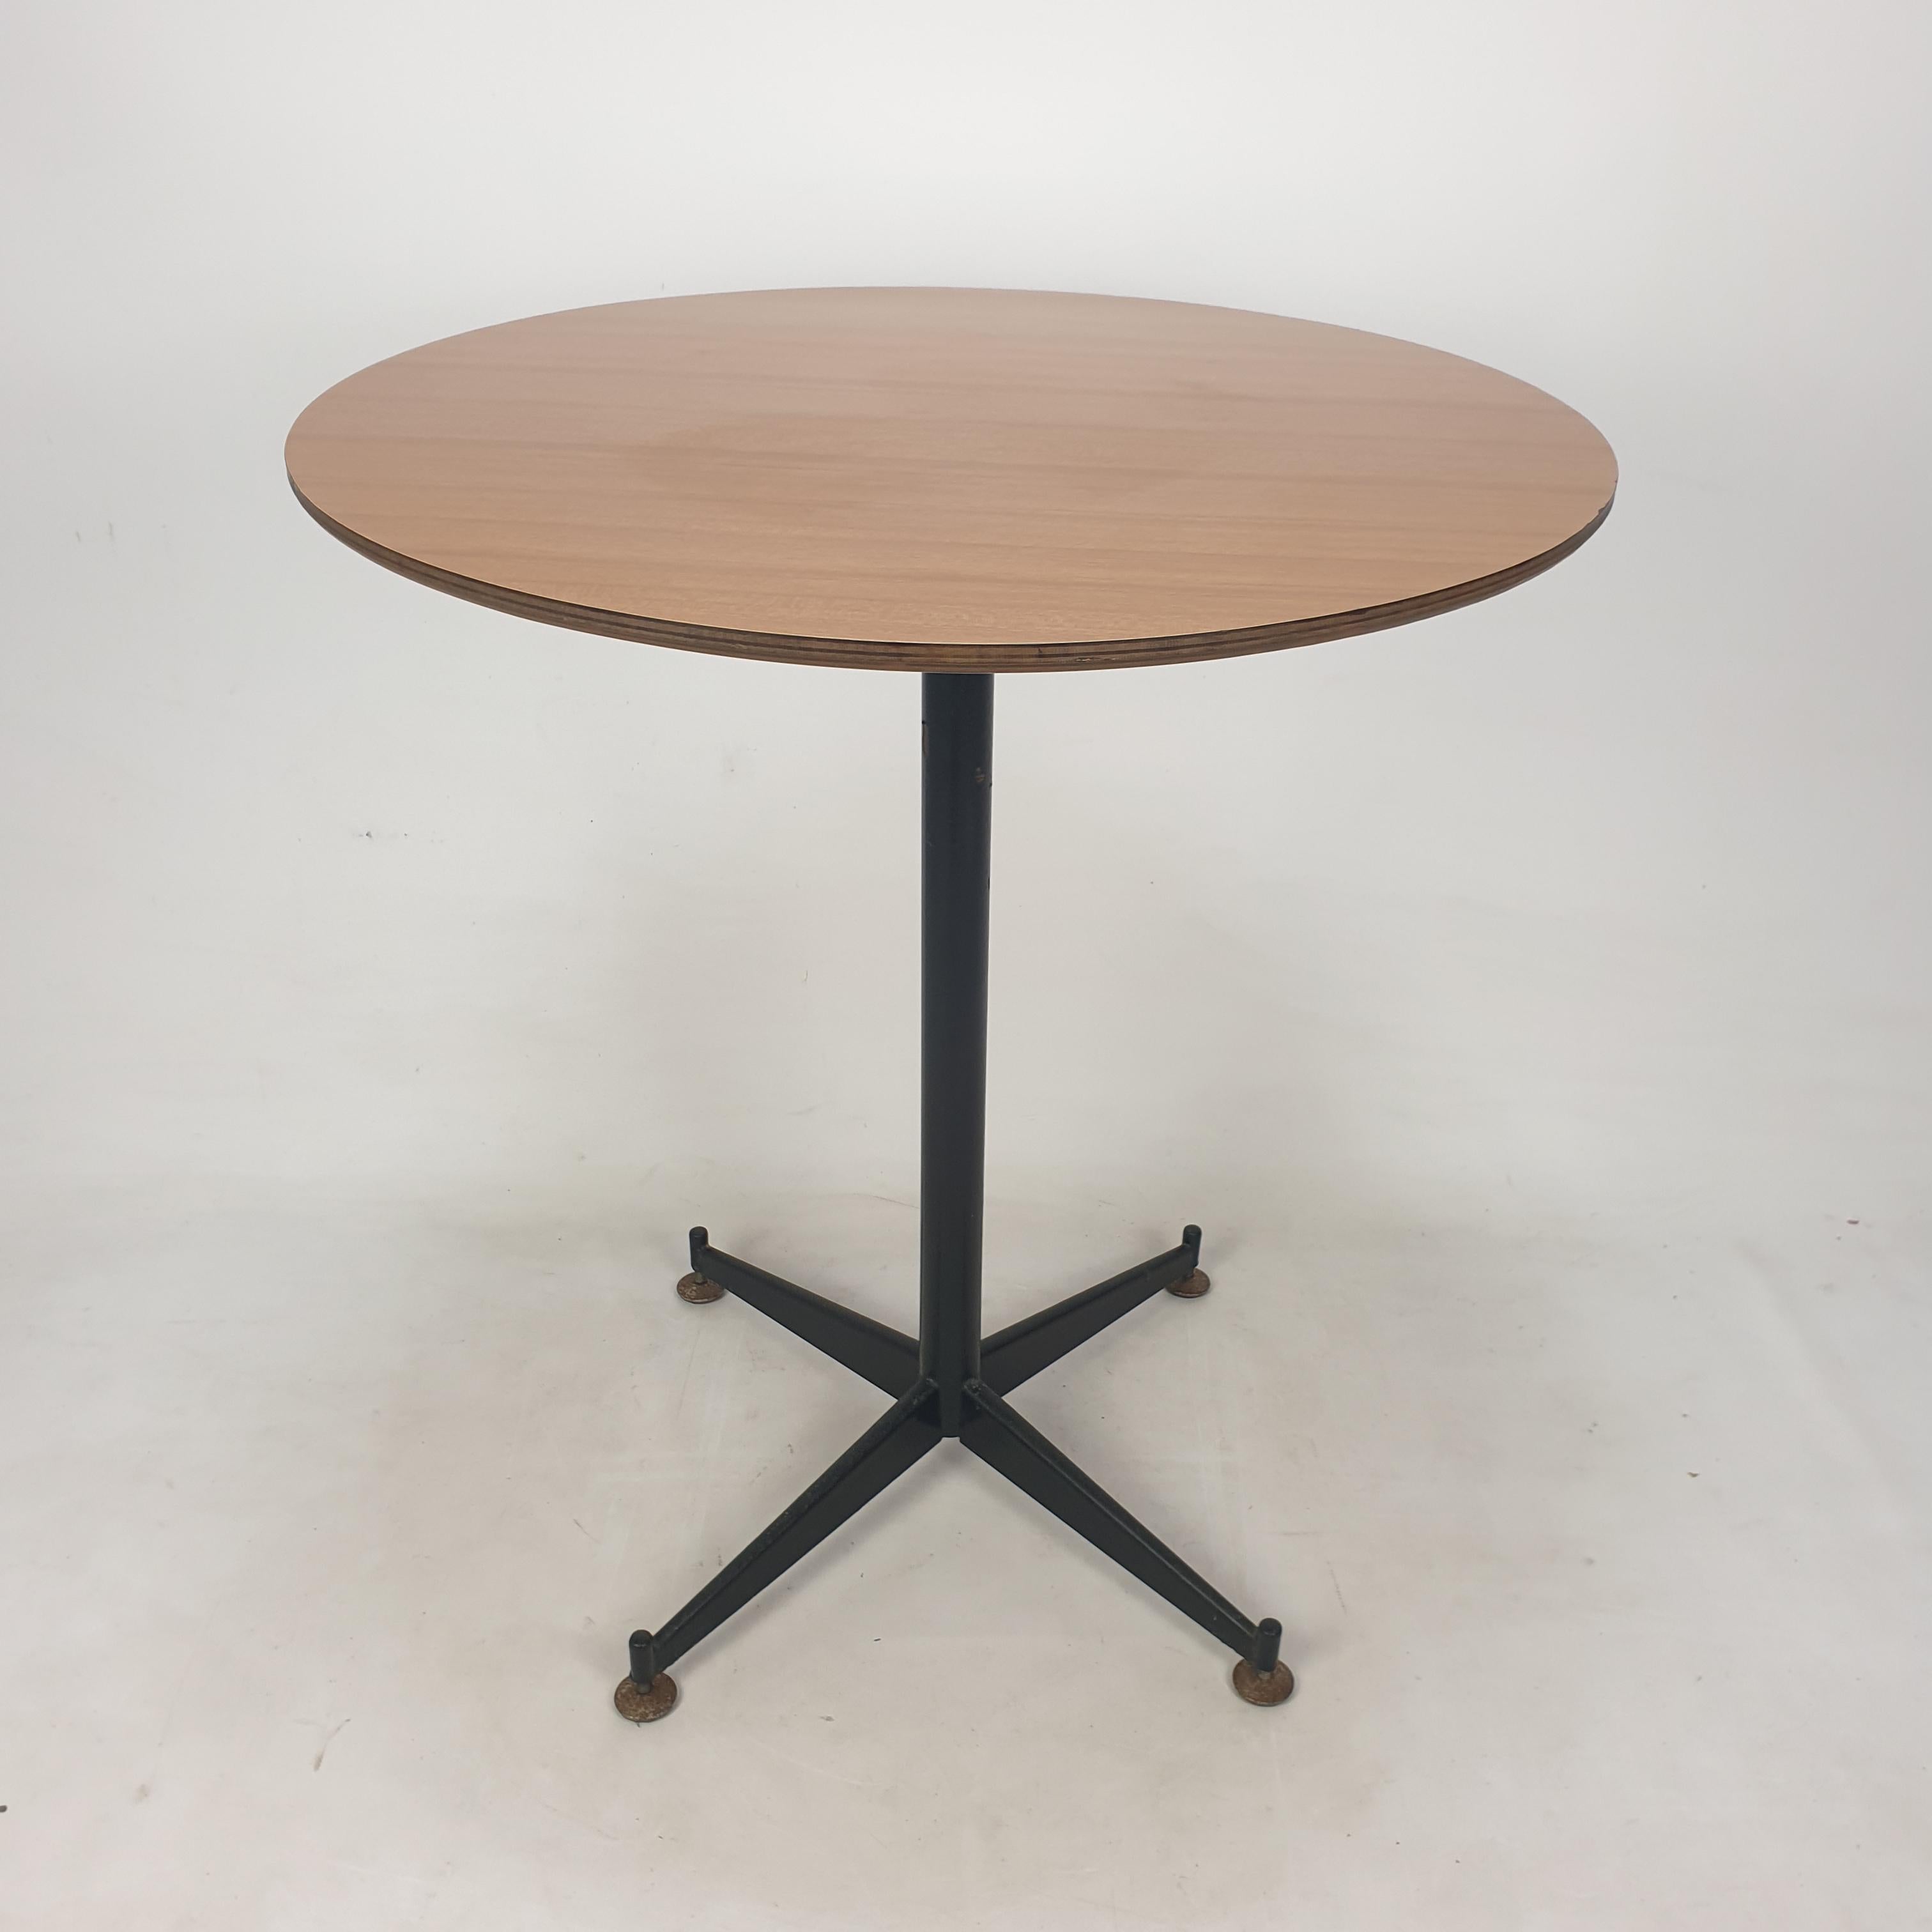 Very nice and cute dining table, fabricated in Italy in the early 60's.

A round wooden plate on a steel frame with 4 adjustable feet.
   